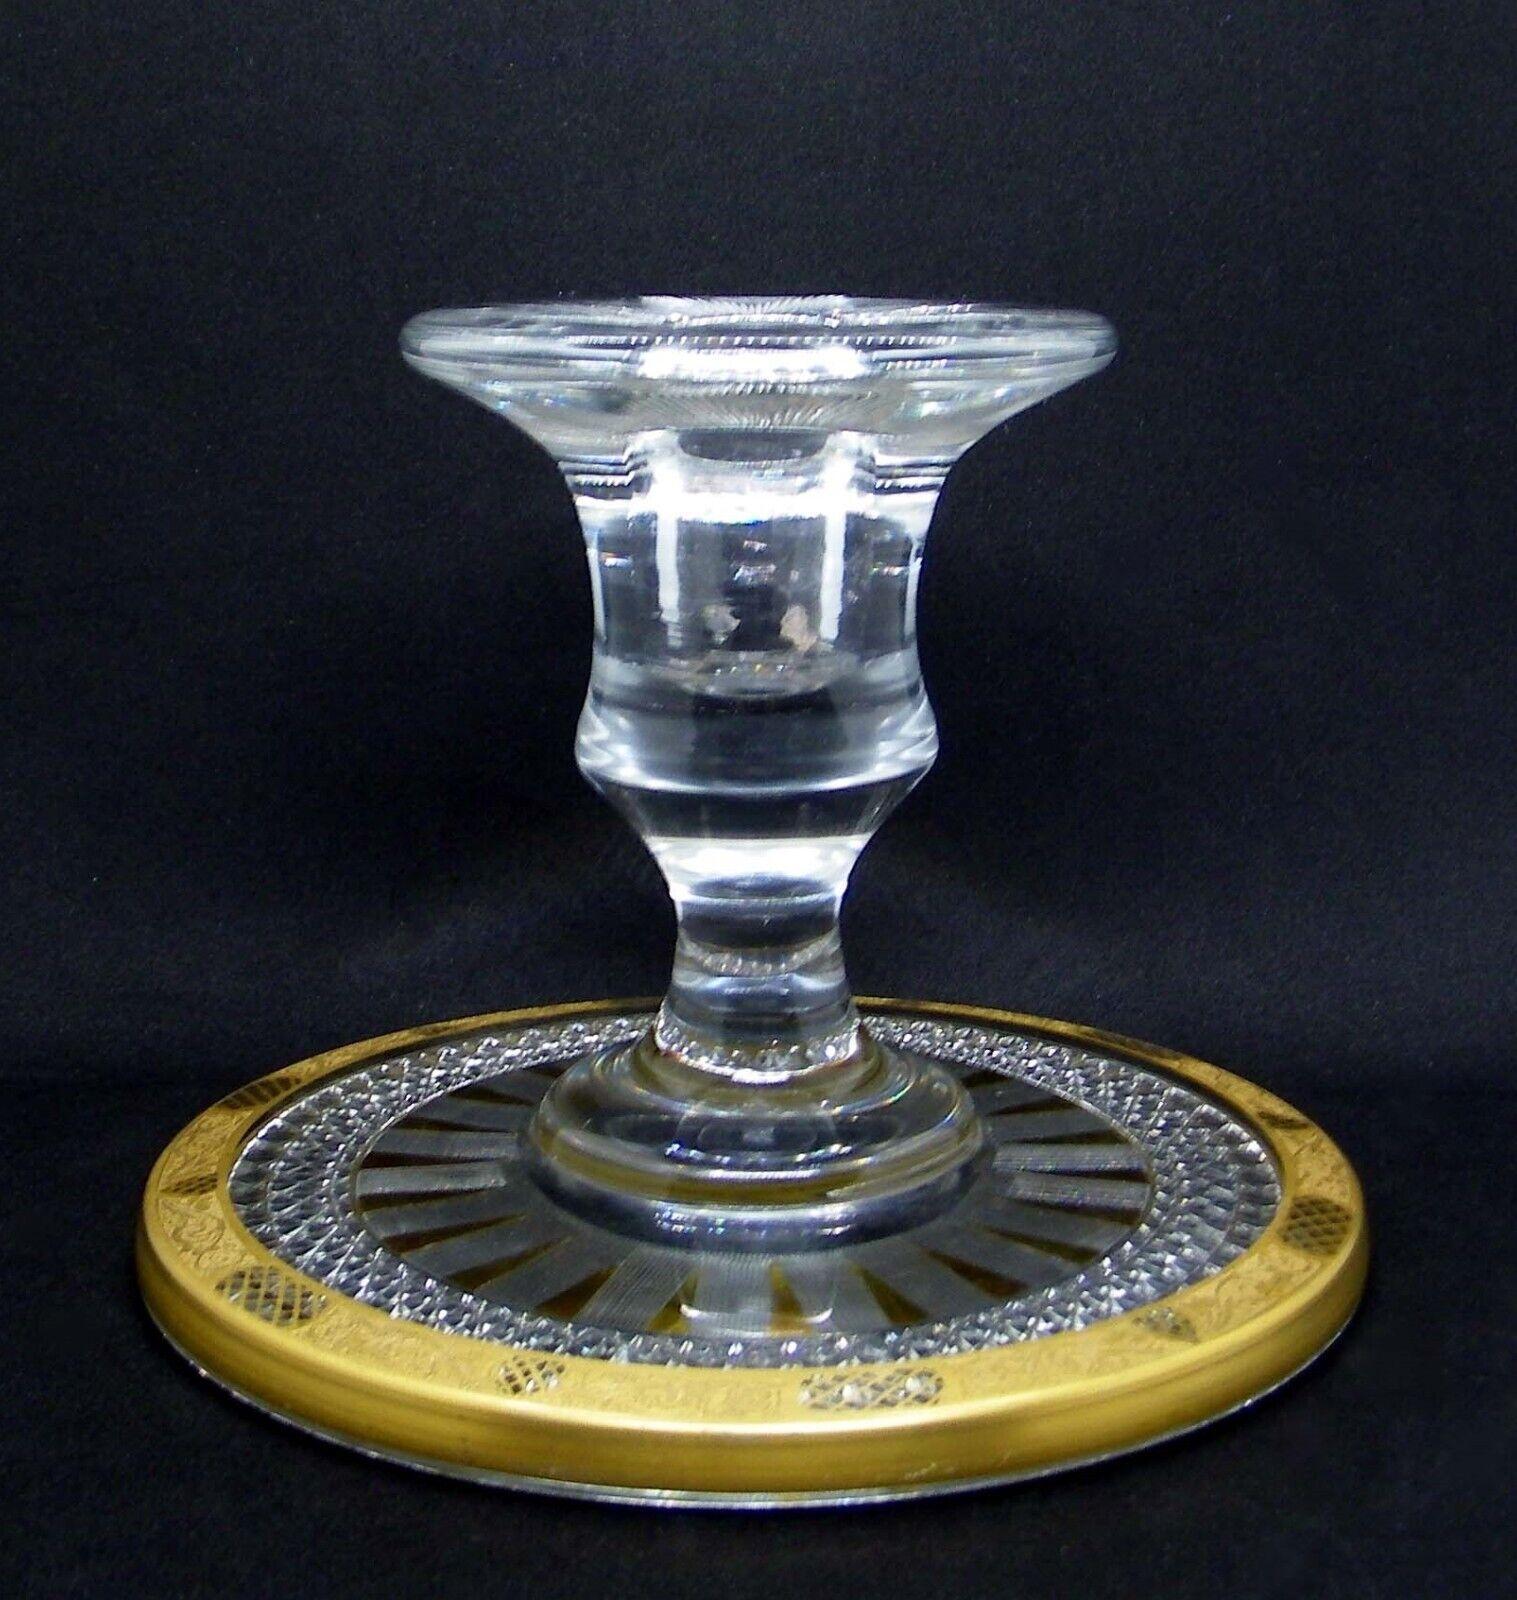 19thc French Antique Cut Crystal/ Gold Bordered Deluxe Candle Holder. This piece is stunning! The detail is amazing.